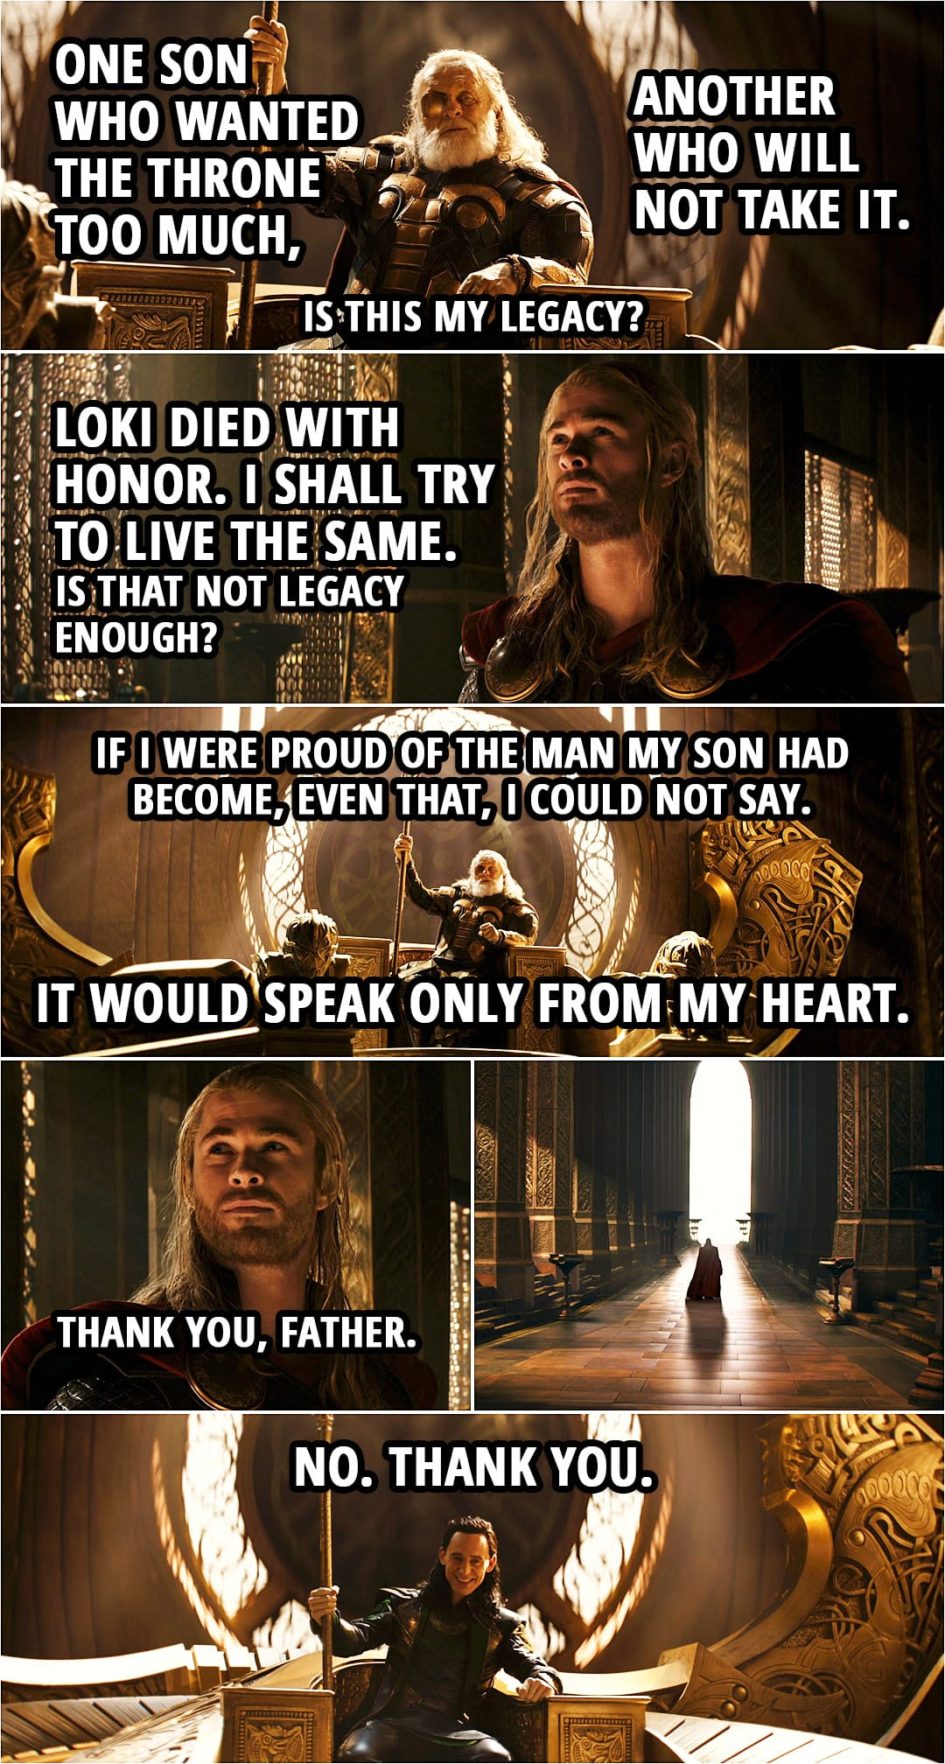 Quote from Thor: The Dark World (2013) | Odin: One son who wanted the throne too much, another who will not take it. Is this my legacy? Thor: Loki died with honor. I shall try to live the same. Is that not legacy enough? (offers Mjolnir back to Odin) Odin: It belongs to you. If you are worthy of it. Thor: I shall try to be. Odin: I cannot give you my blessing, nor can I wish you good fortune. Thor: I know. Odin: If I were proud of the man my son had become, even that, I could not say. It would speak only from my heart. Go, my son. Thor: Thank you, Father. (Odin turns into Loki...) Loki: No. Thank you.